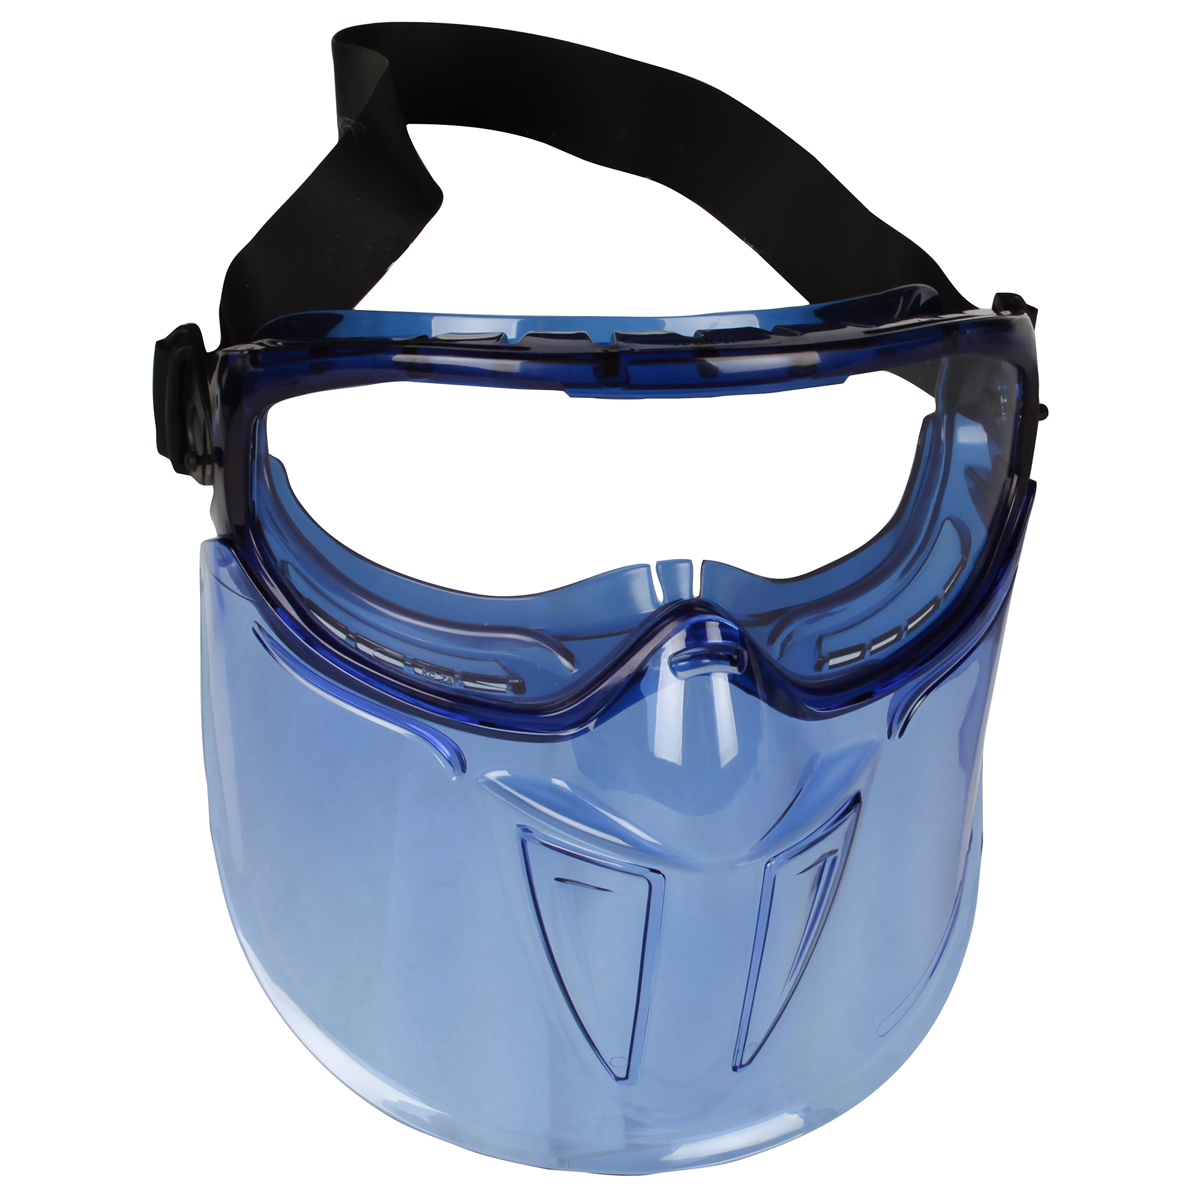 Frame Monogoggle™ - Clear And Shield Blue Anti-Fog Airgas K4518629 Goggles With Splash XTR Kimberly-Clark - Lens KleenGuard™ Professional